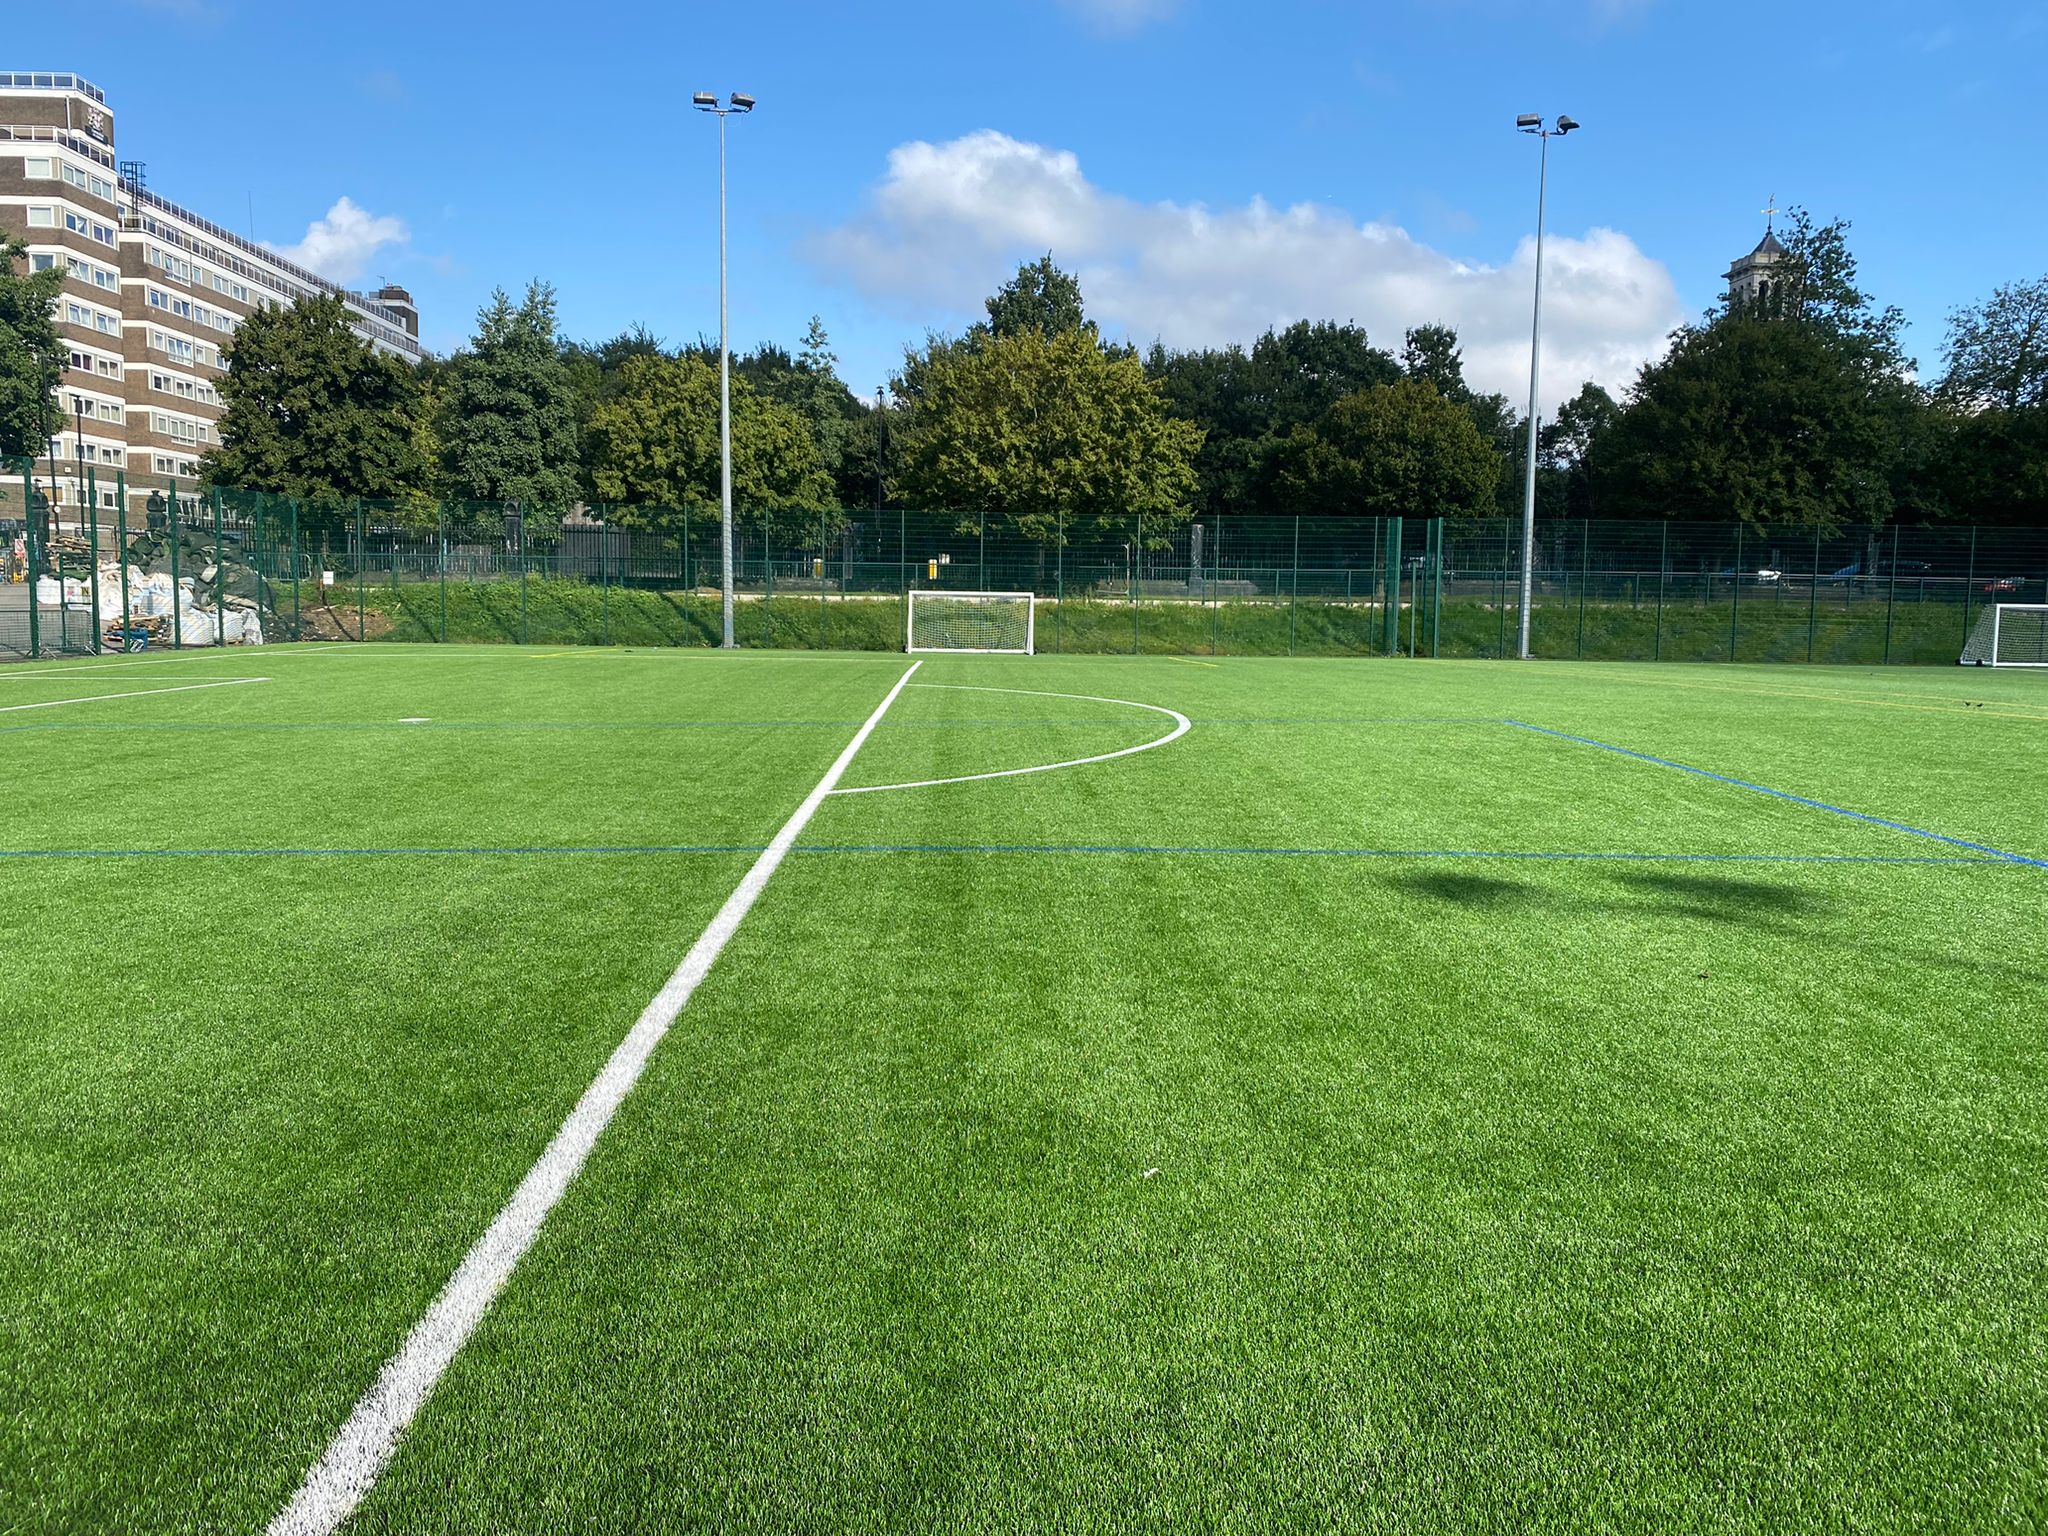 When we installed Market Road’s new artificial football pitches we ensured that the old pitch surfaces were responsibly removed and recycled.